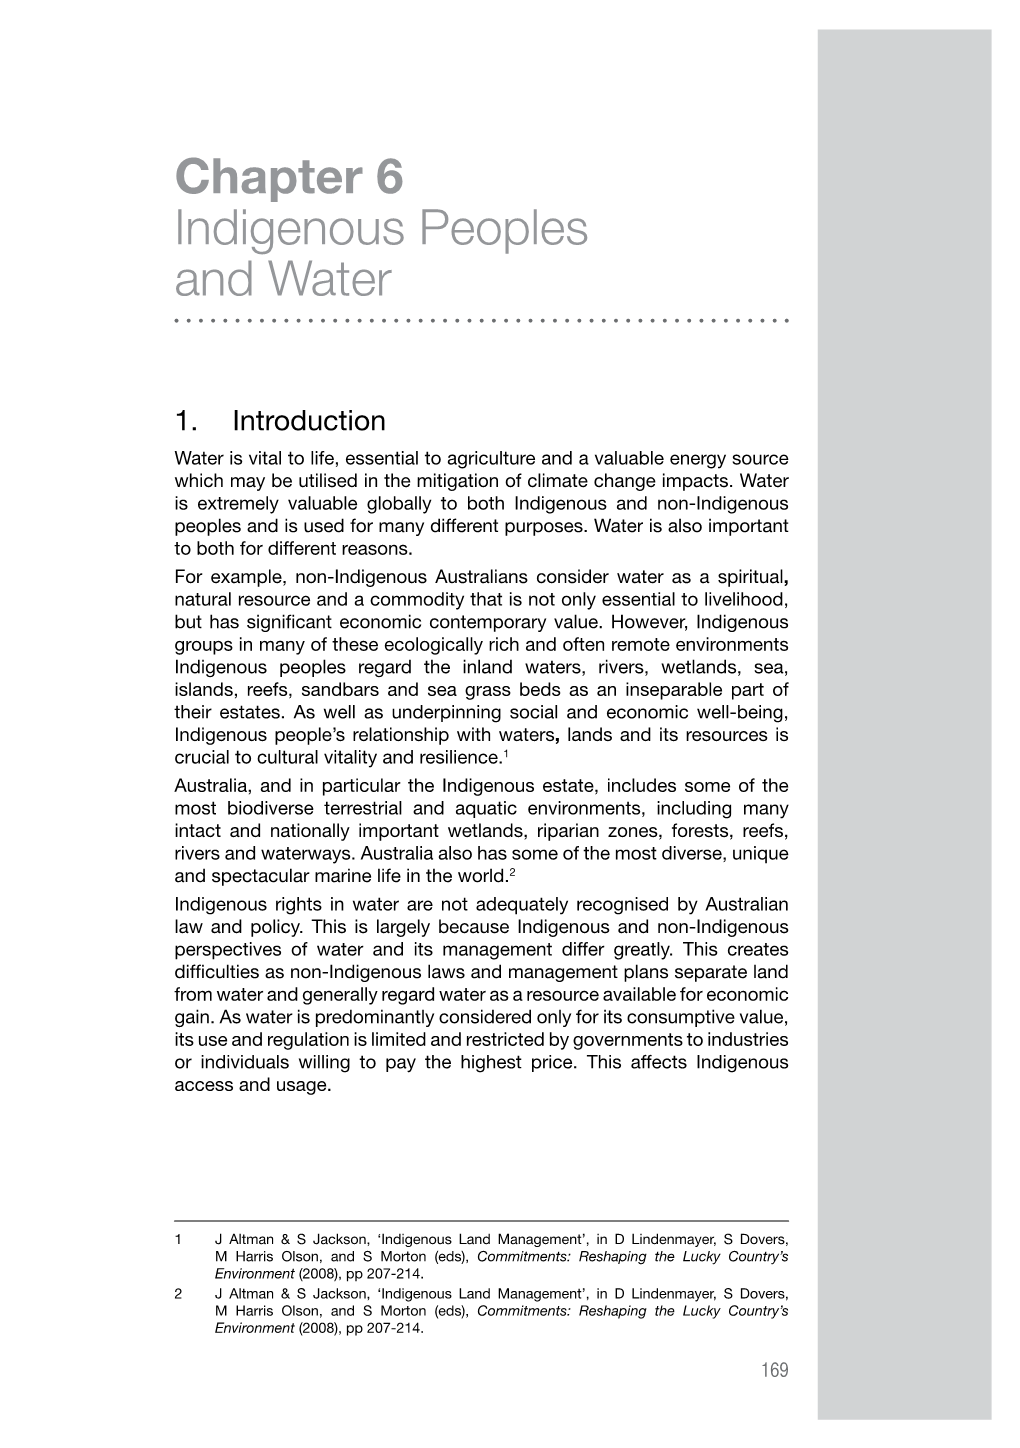 Chapter 6 Indigenous Peoples and Water